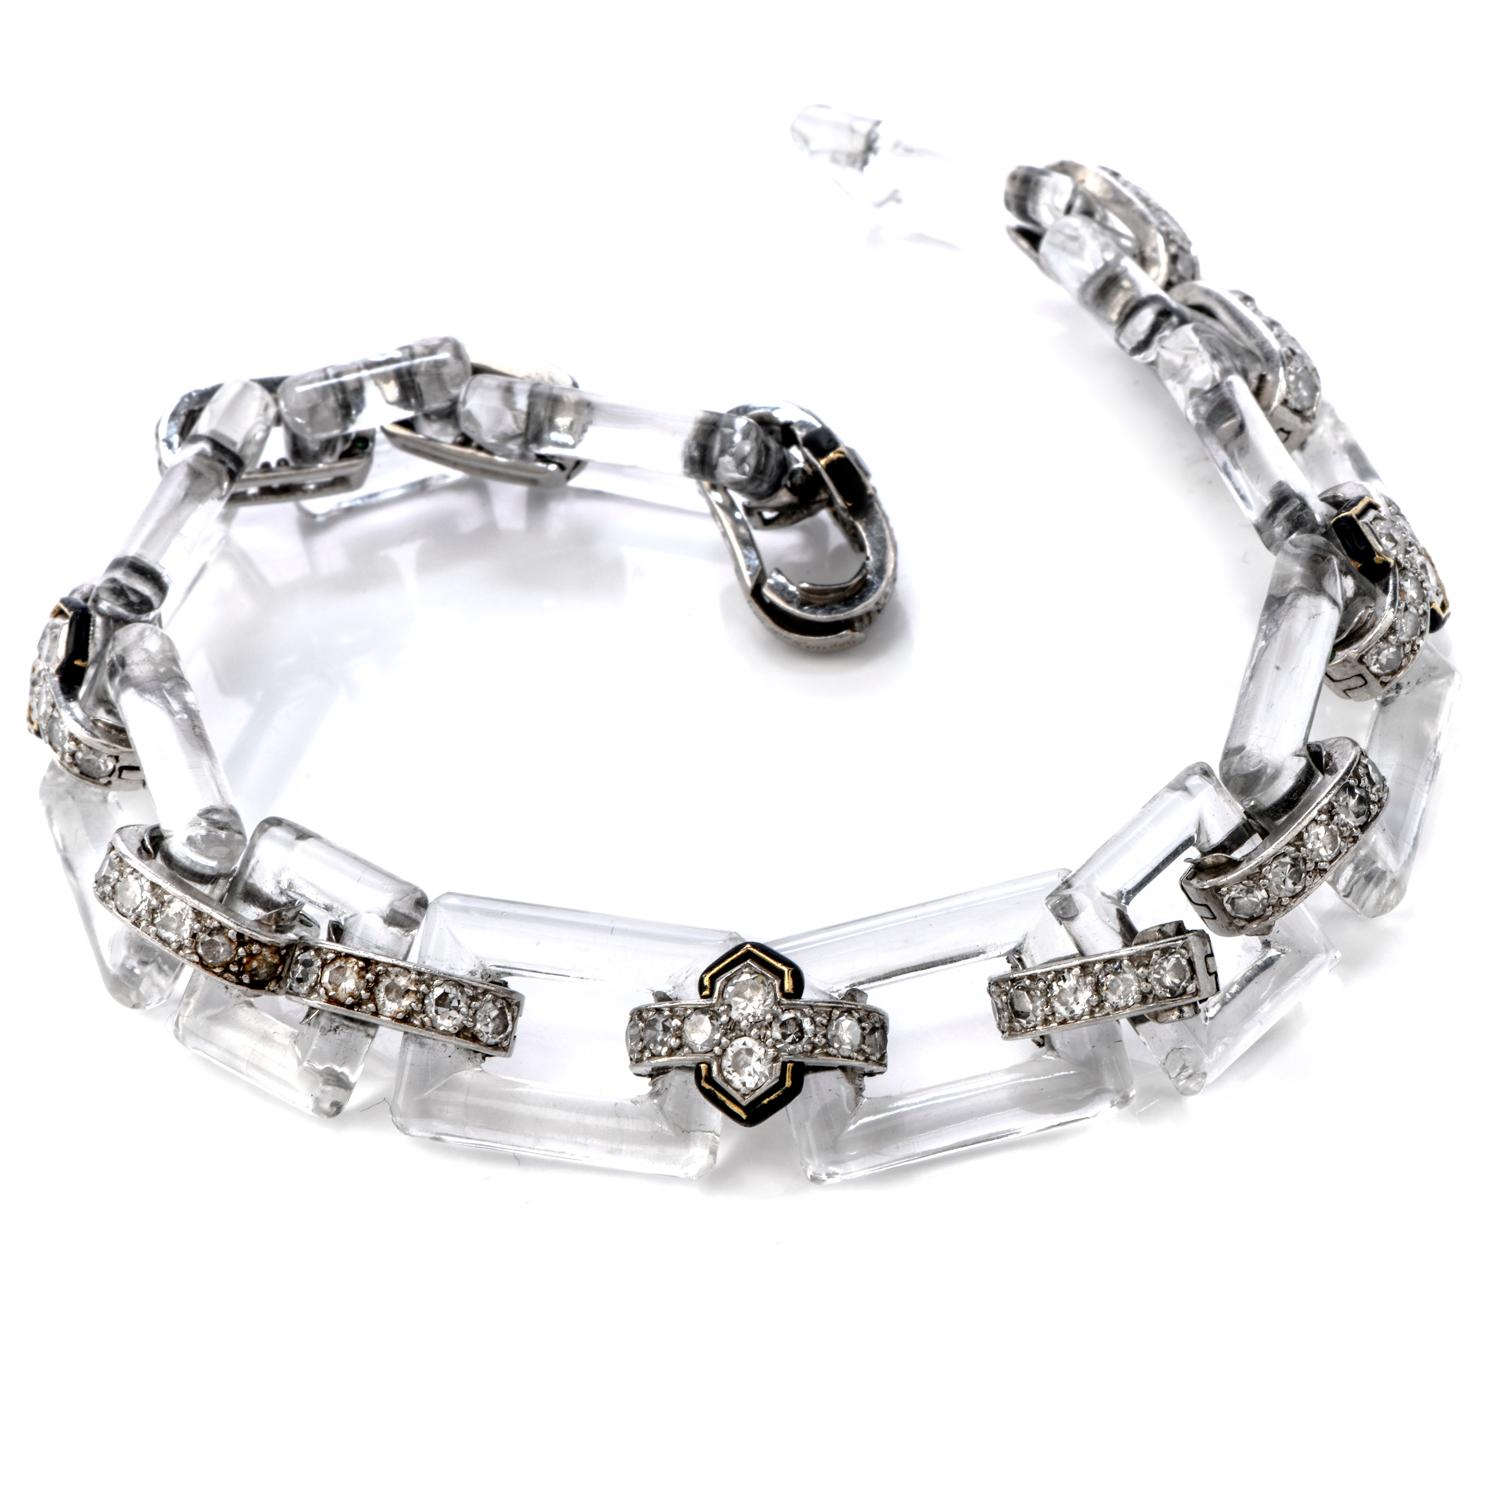 An Art Deco diamond and rock crystal bracelet, by Cartier, London, this beautiful piece has pave set diamond links with black enamel details. It is secured with a hidden fold over the clasp.

Metal Type: Platinum

Total Item Weight approx: 25.2